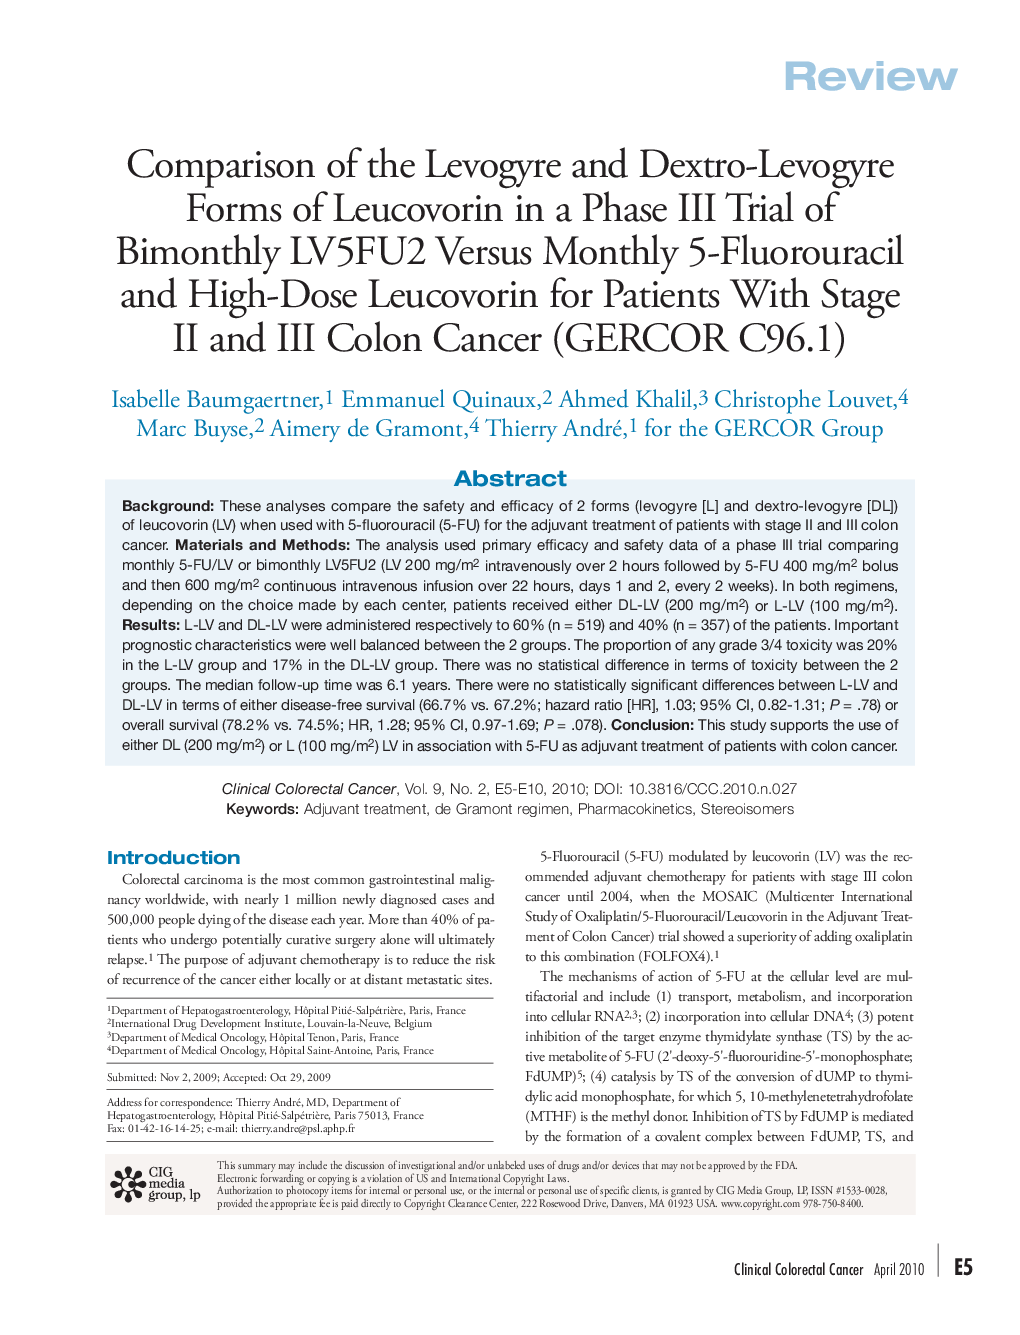 Comparison of the Levogyre and Dextro-Levogyre Forms of Leucovorin in a Phase III Trial of Bimonthly LV5FU2 Versus Monthly 5-Fluorouracil and High-Dose Leucovorin for Patients With Stage II and III Colon Cancer (GERCOR C96.1) 